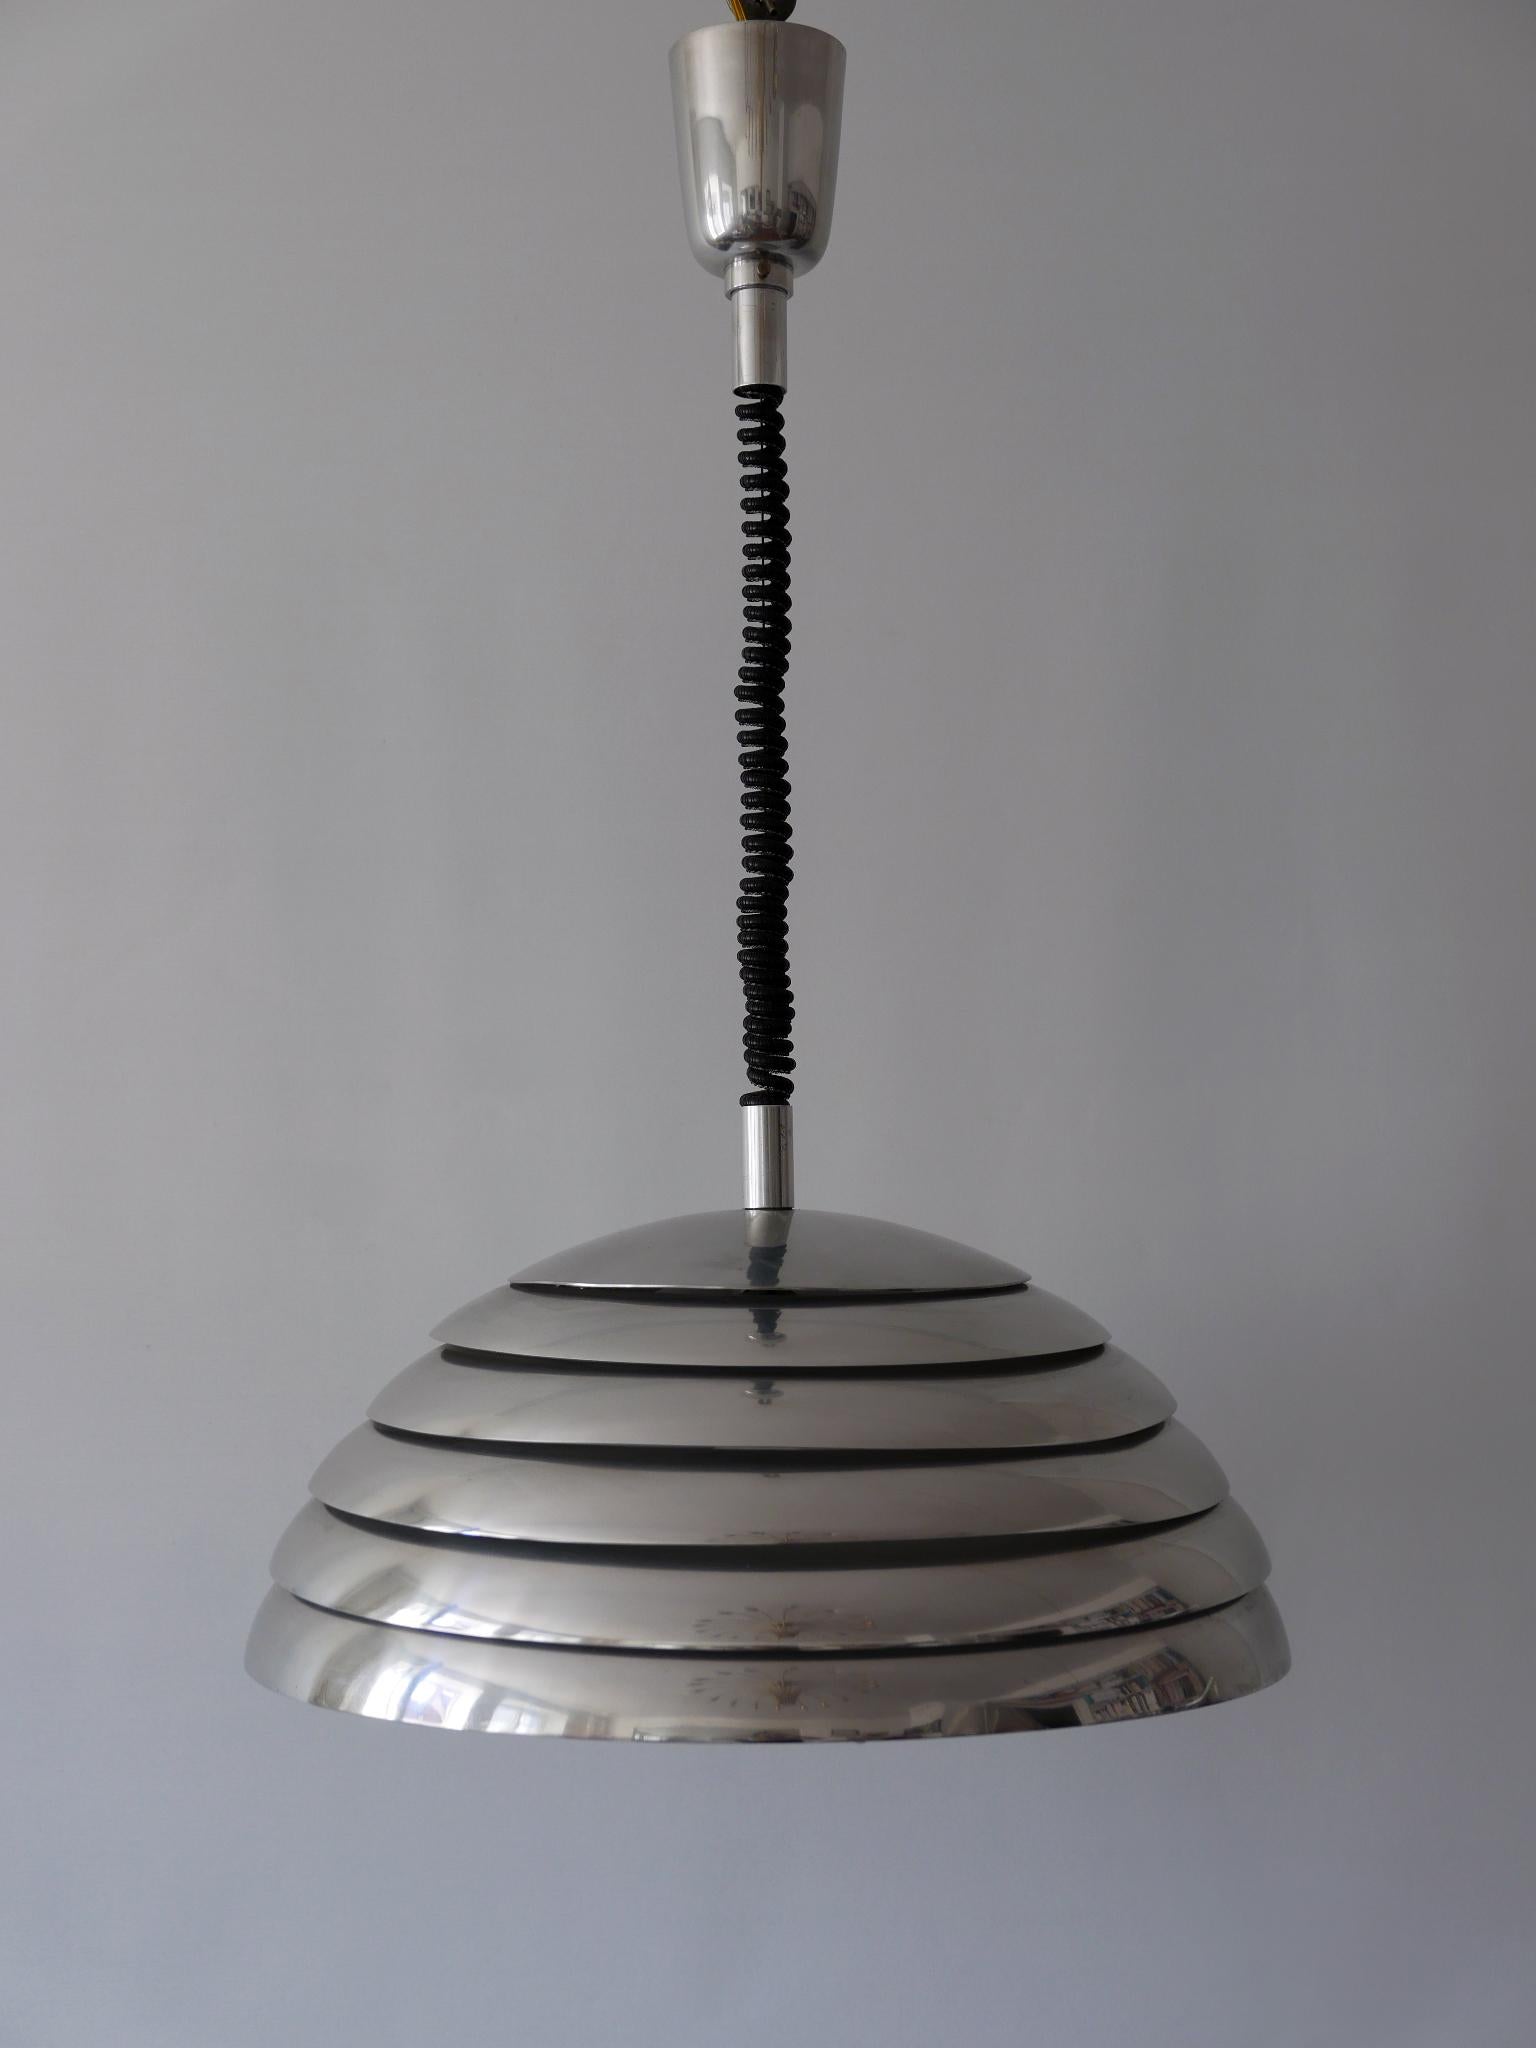 Rare, gorgeous Mid-Century Modern pendant lamp or hanging light. Manufactured by Vereinigte Werkstätten München, Germany, 1960s. 

Executed in polished aluminium sheet and lucite diffuser, the pendant lamp needs 1 x E27 / E26 Edison screw fit